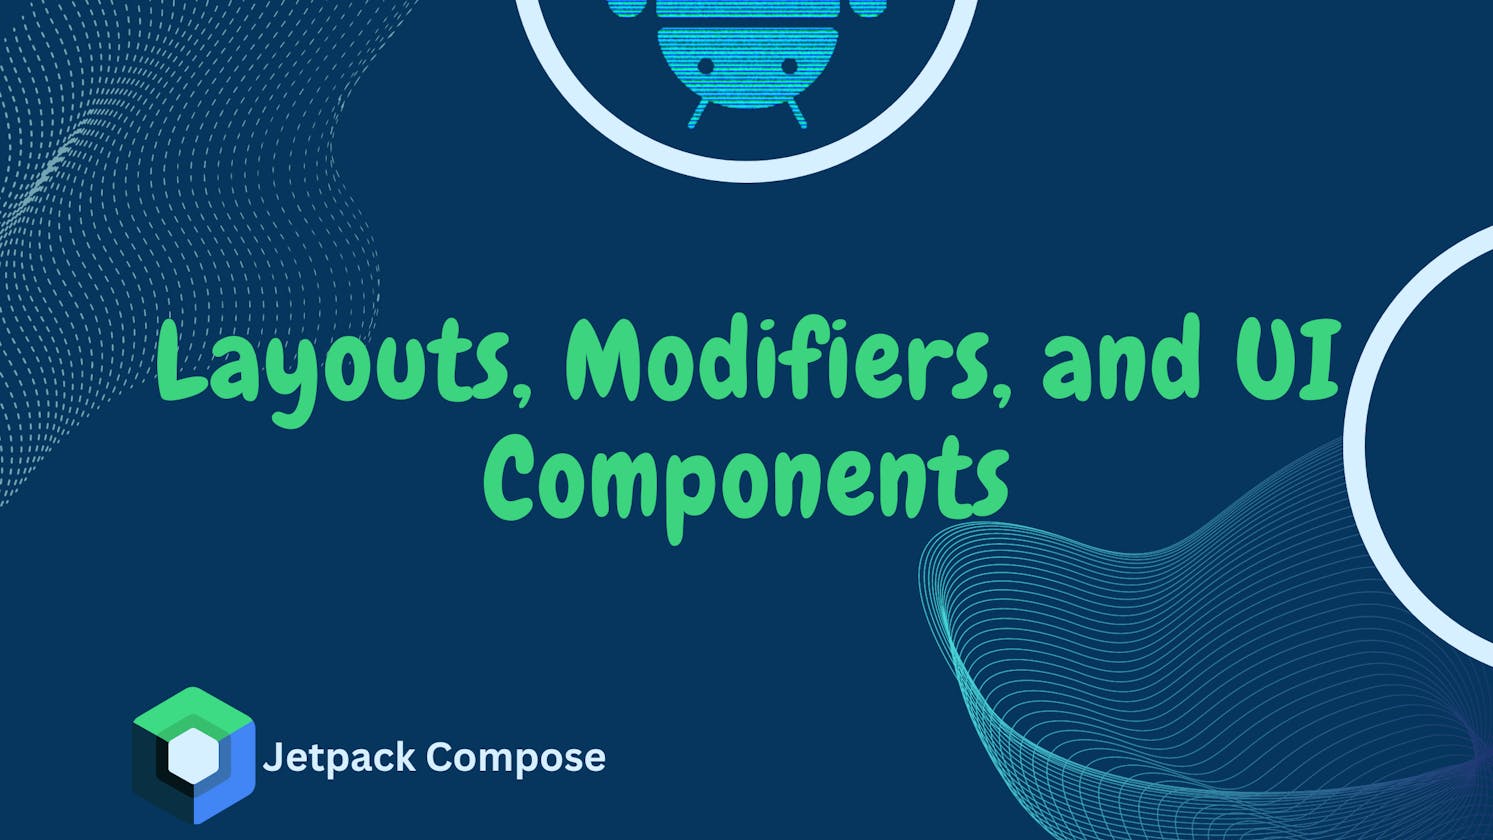 A Guide to Layouts, Modifiers, and Material 3 UI Components in Jetpack Compose